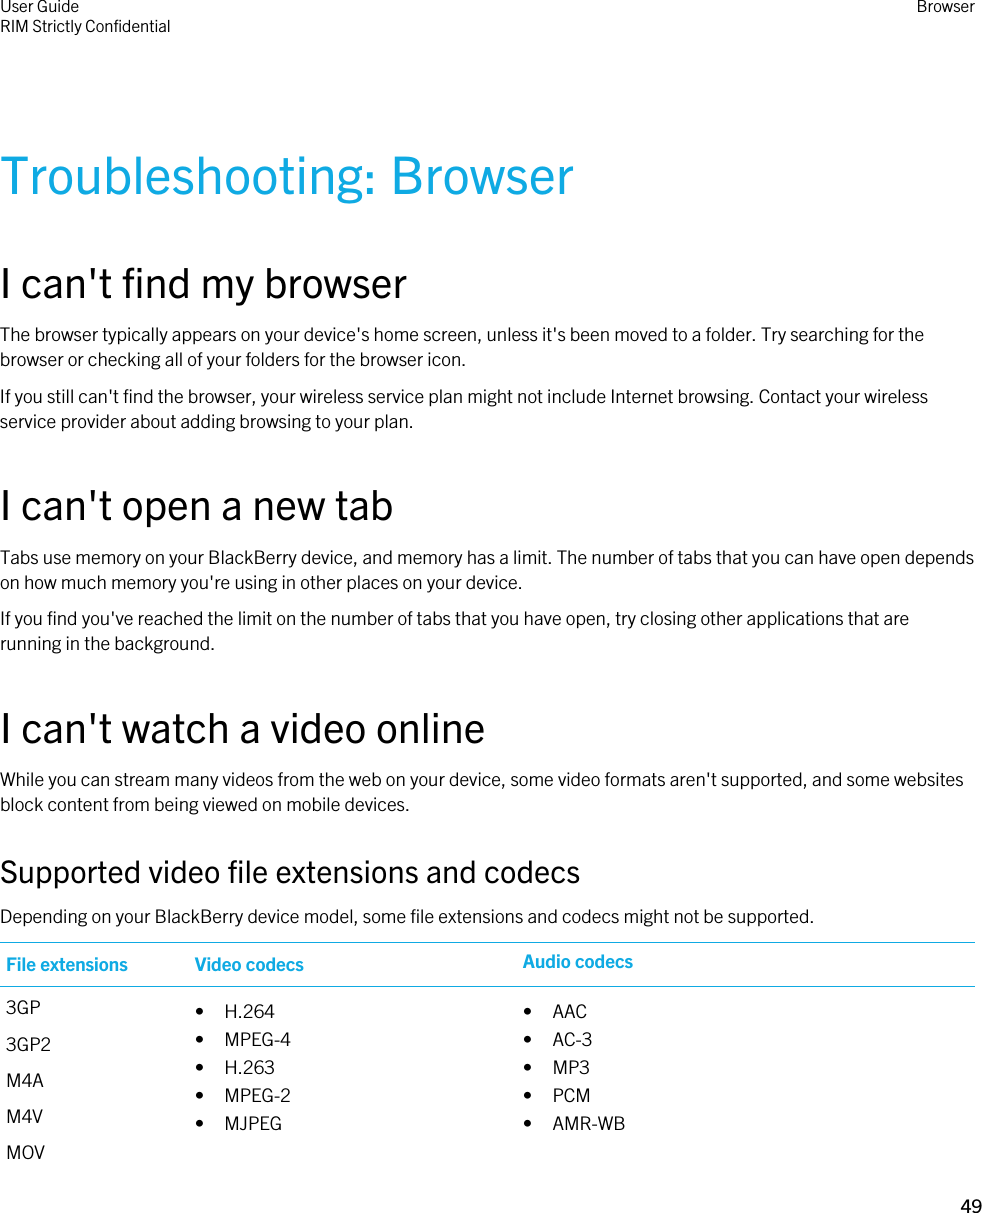 Troubleshooting: BrowserI can&apos;t find my browserThe browser typically appears on your device&apos;s home screen, unless it&apos;s been moved to a folder. Try searching for the browser or checking all of your folders for the browser icon.If you still can&apos;t find the browser, your wireless service plan might not include Internet browsing. Contact your wireless service provider about adding browsing to your plan.I can&apos;t open a new tabTabs use memory on your BlackBerry device, and memory has a limit. The number of tabs that you can have open depends on how much memory you&apos;re using in other places on your device.If you find you&apos;ve reached the limit on the number of tabs that you have open, try closing other applications that are running in the background.I can&apos;t watch a video onlineWhile you can stream many videos from the web on your device, some video formats aren&apos;t supported, and some websites block content from being viewed on mobile devices.Supported video file extensions and codecsDepending on your BlackBerry device model, some file extensions and codecs might not be supported.File extensions Video codecs Audio codecs3GP3GP2M4AM4VMOV• H.264• MPEG-4• H.263• MPEG-2• MJPEG• AAC• AC-3• MP3• PCM• AMR-WBUser GuideRIM Strictly ConfidentialBrowser49 